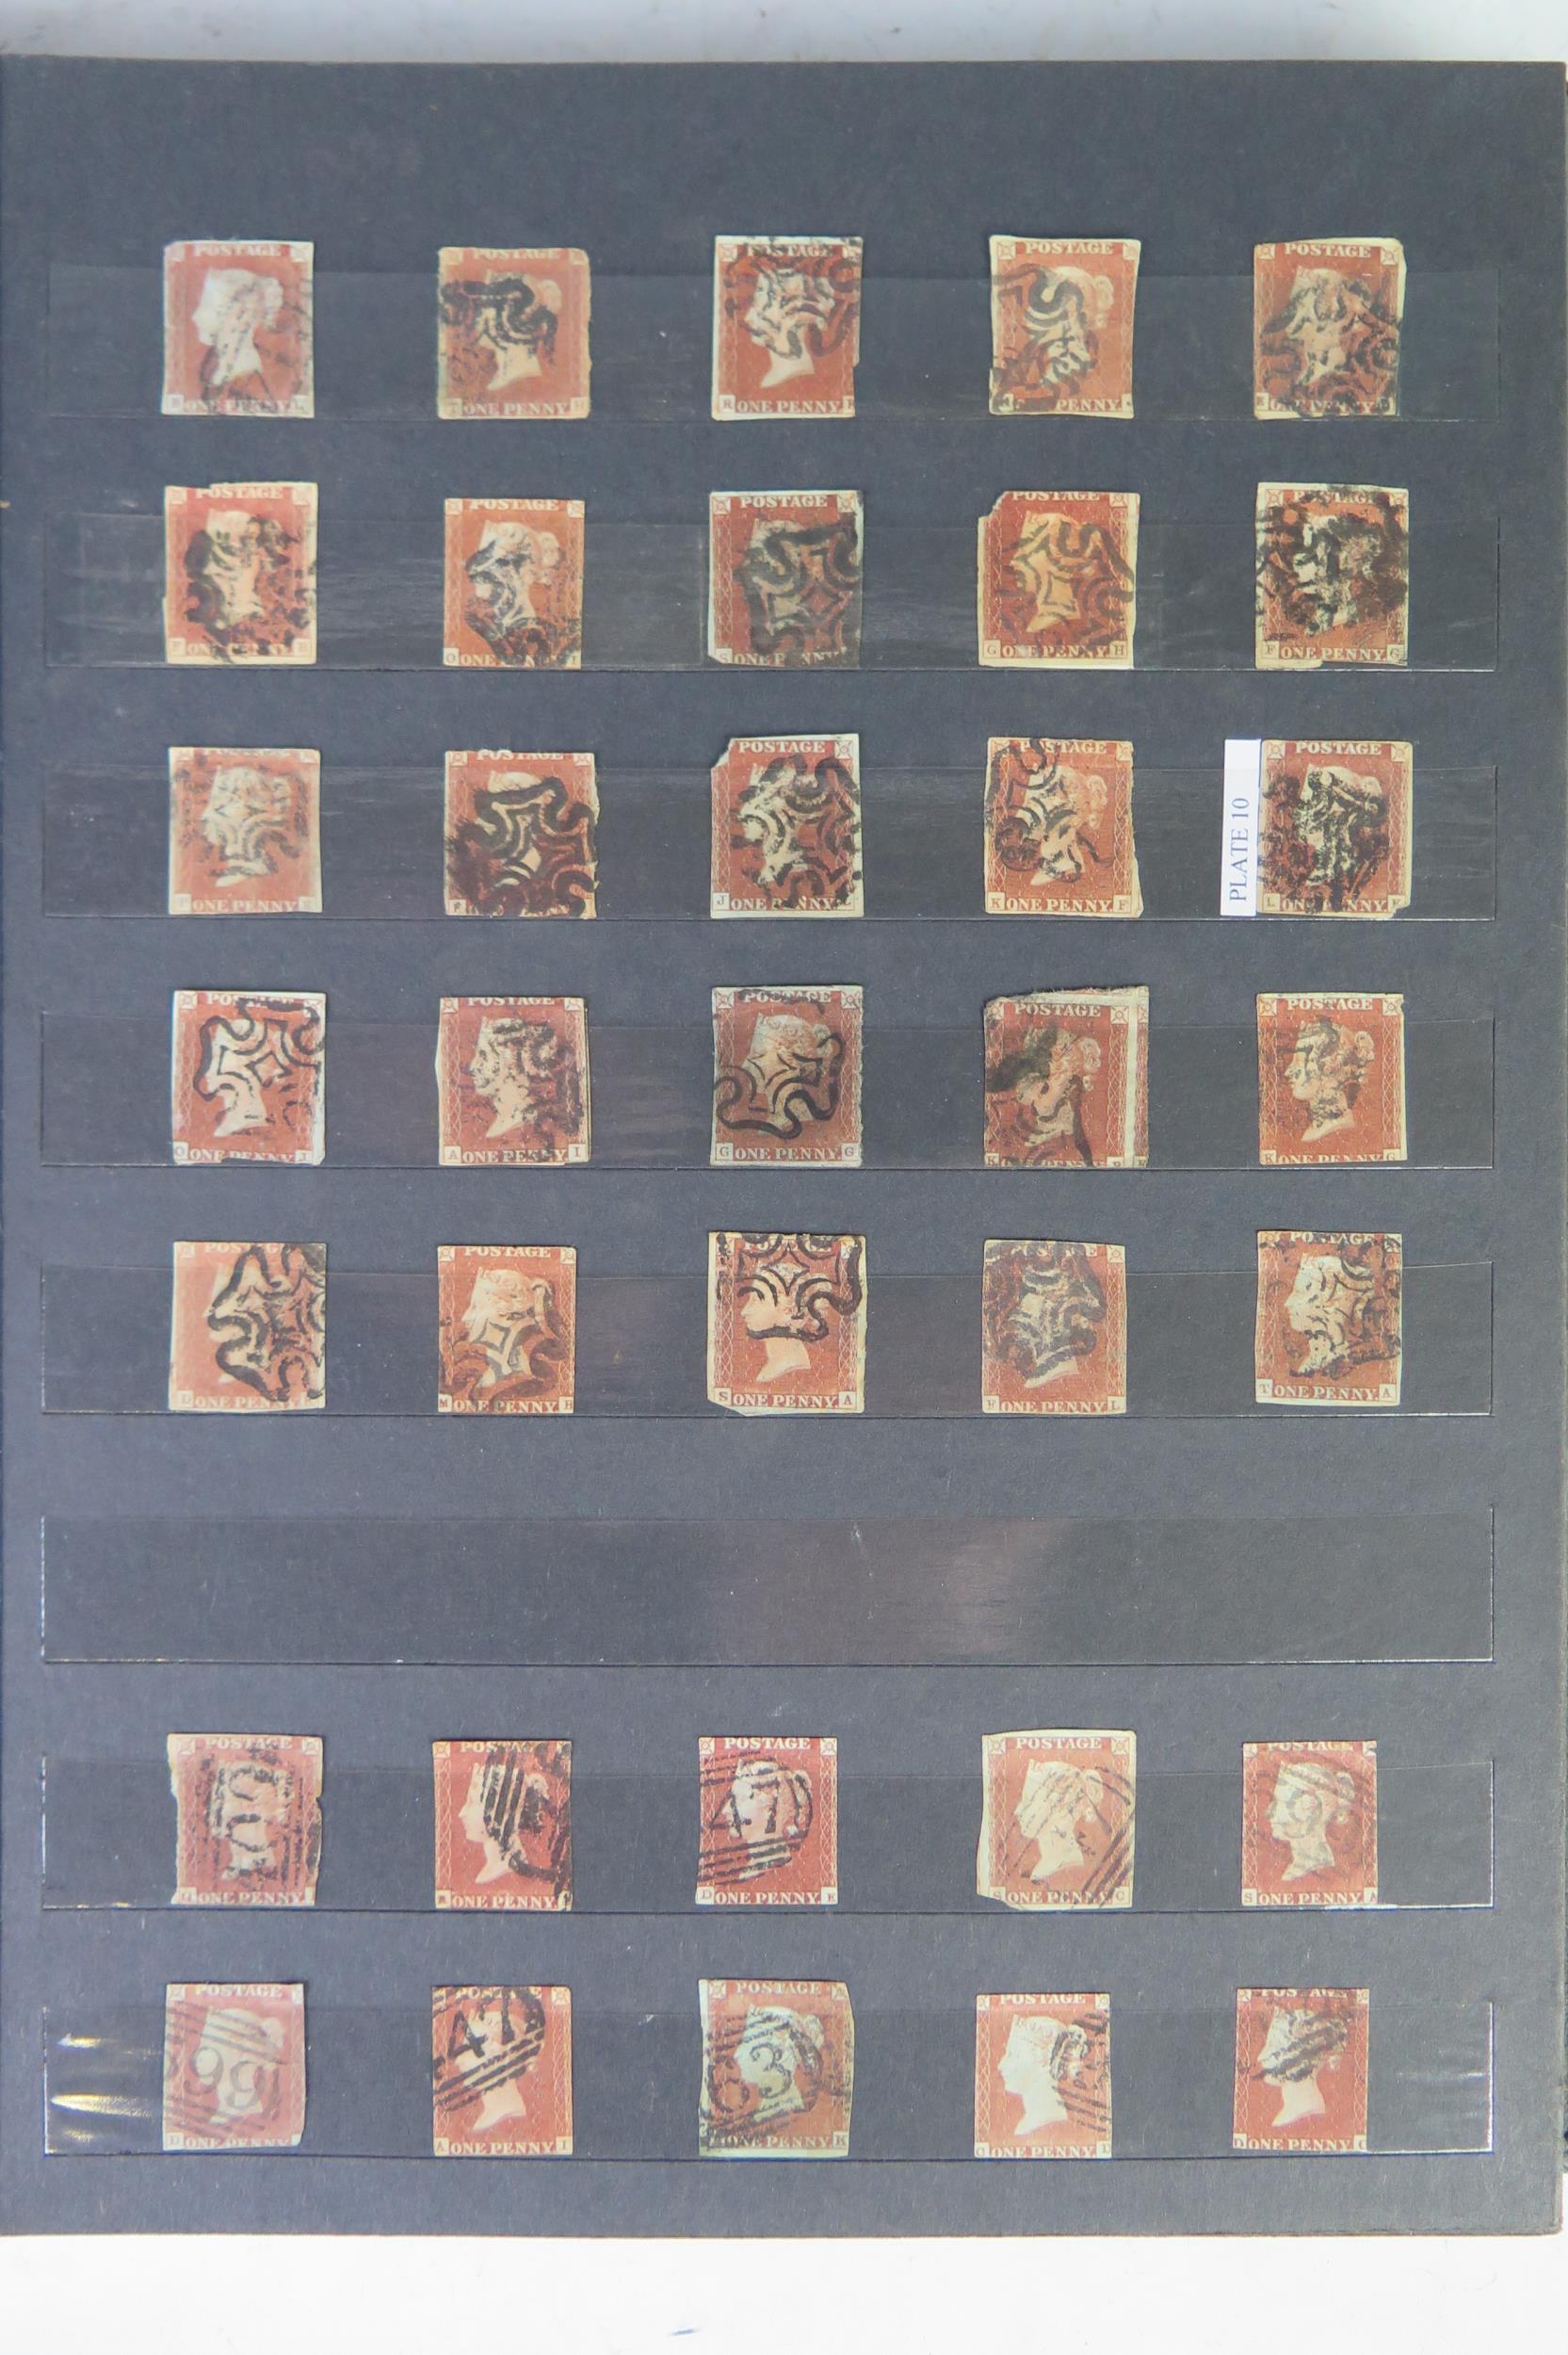 Album of GB Stamps including two Penny Blacks, numerous Penny Reds including plate 10 and later